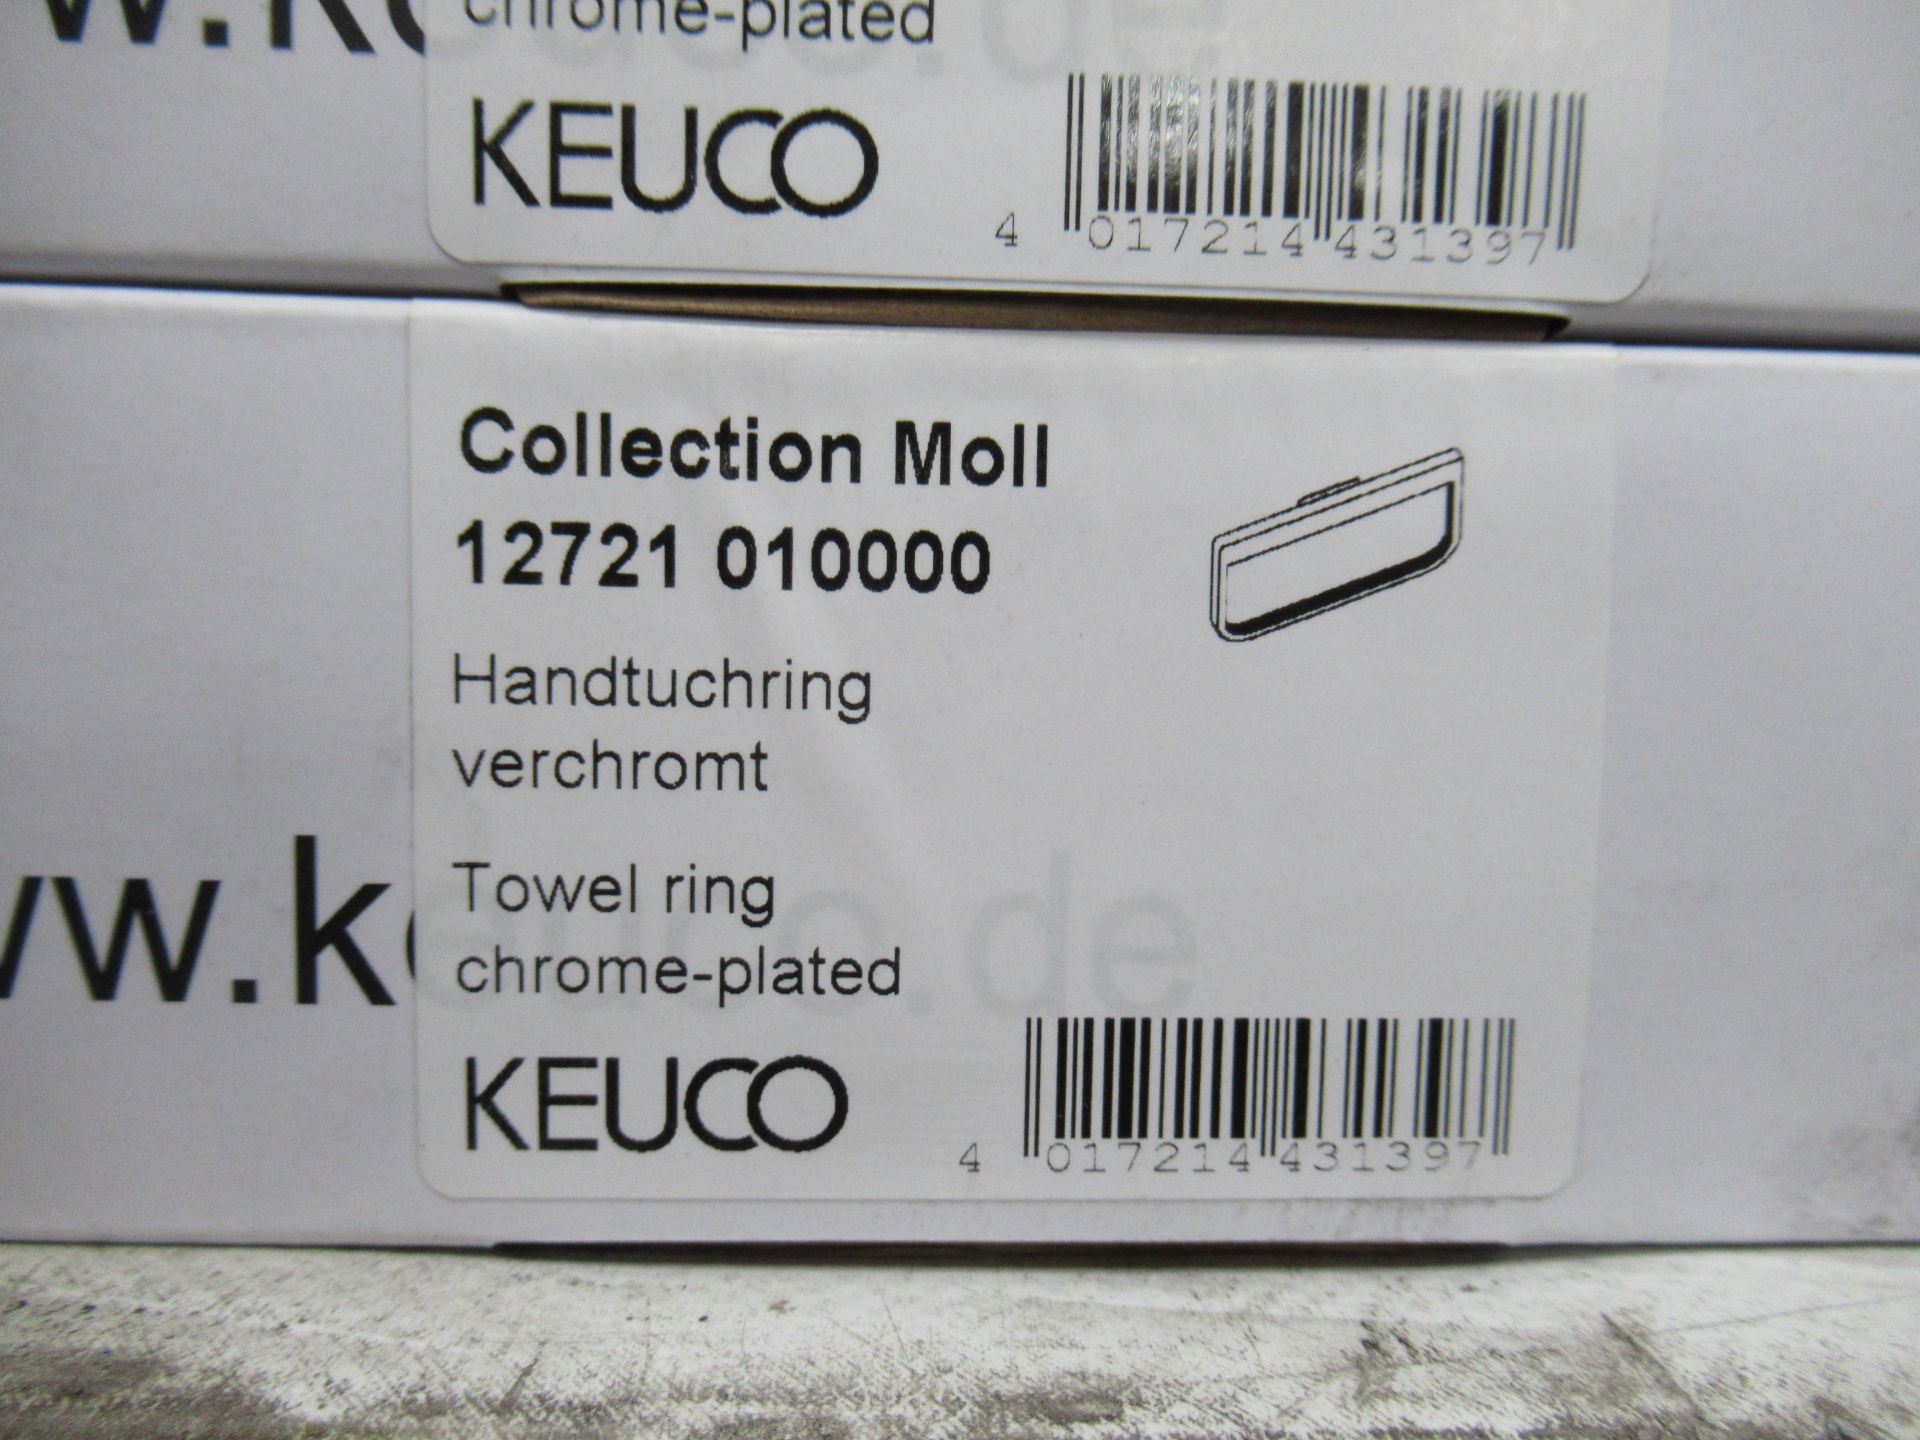 3 x Keuco Collection Moll Towel Rings, Chrome Plated, P/N 12721-010000 - Image 2 of 2